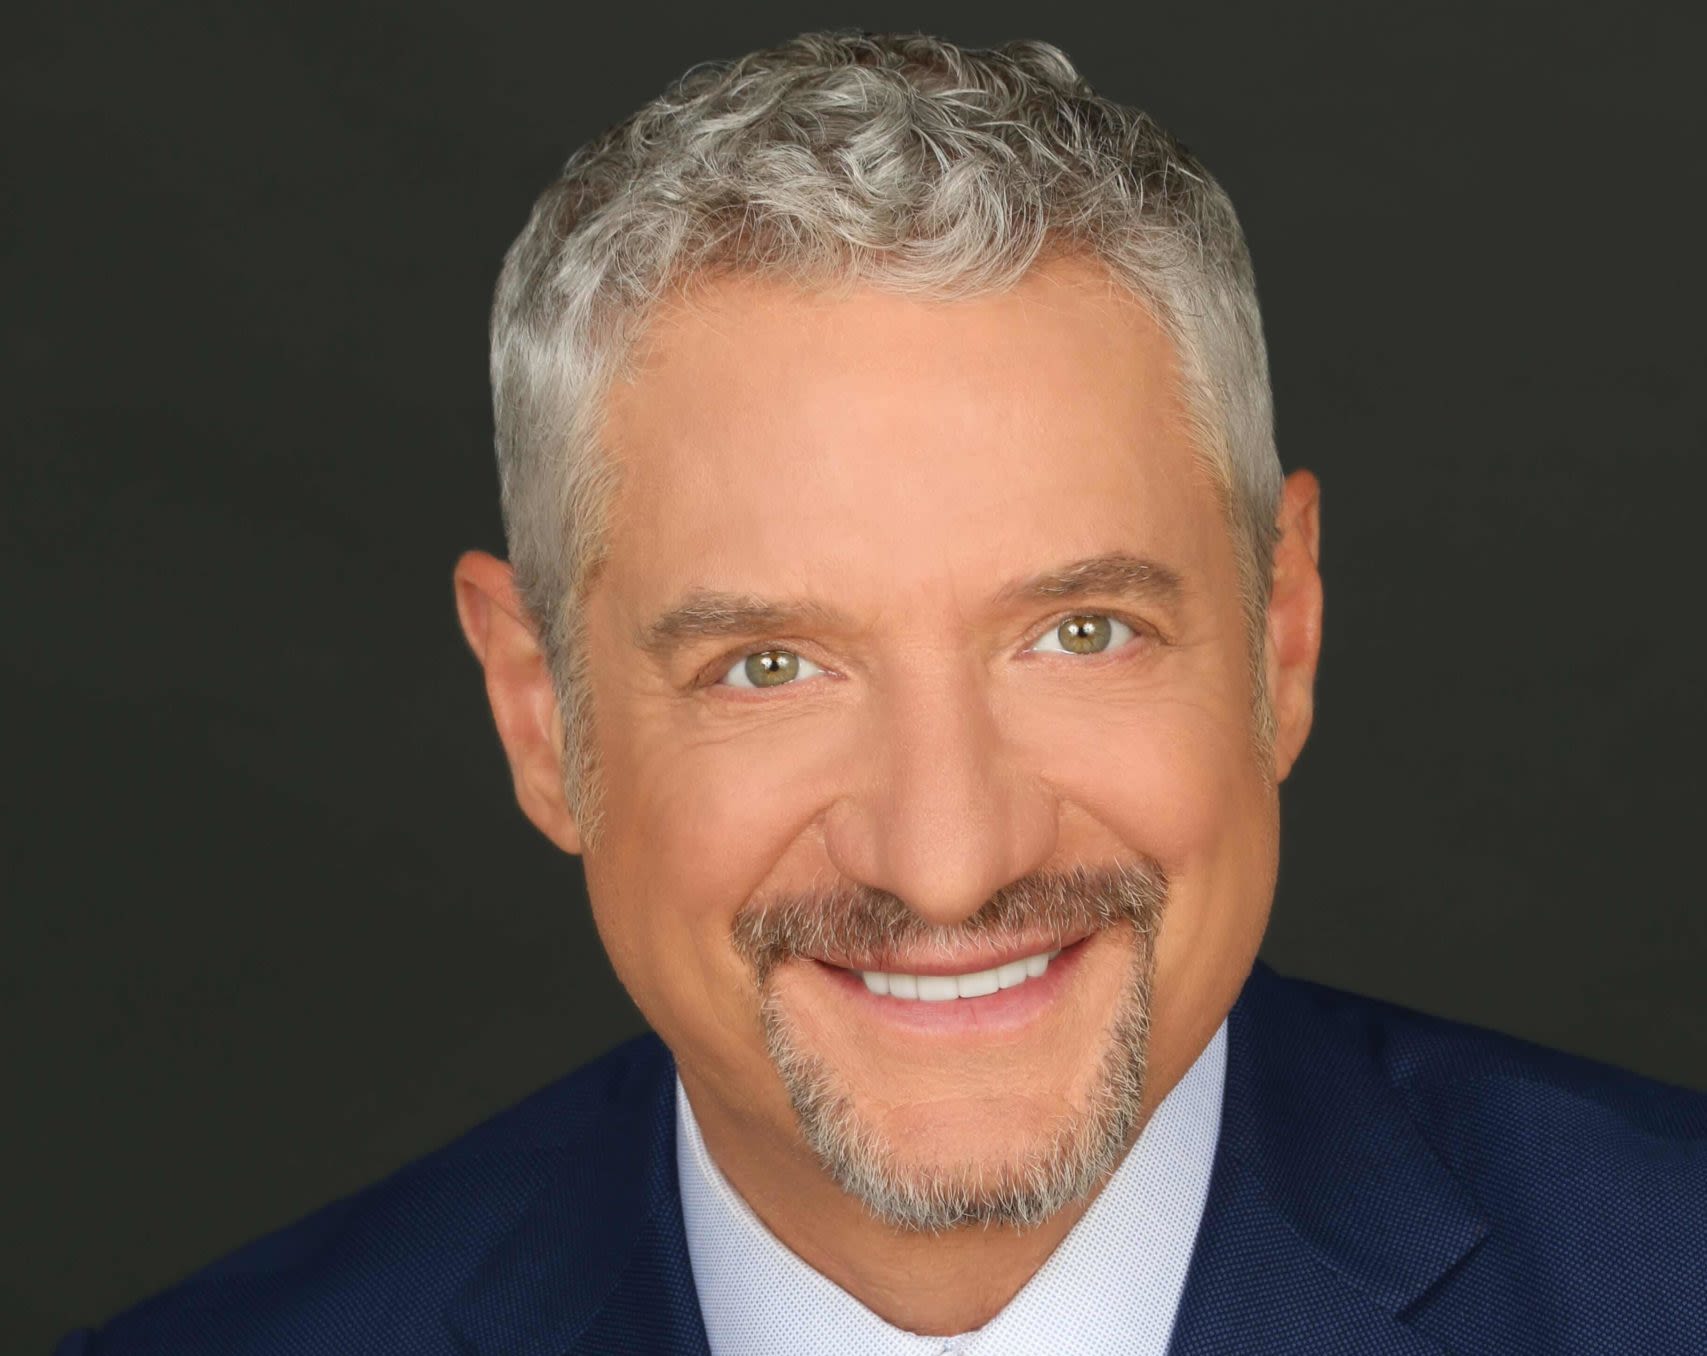 Ticker: Rick Leventhal Anchors New Show On Newsmax2, Scripps News and ProPublica Launch an Investigative Venture